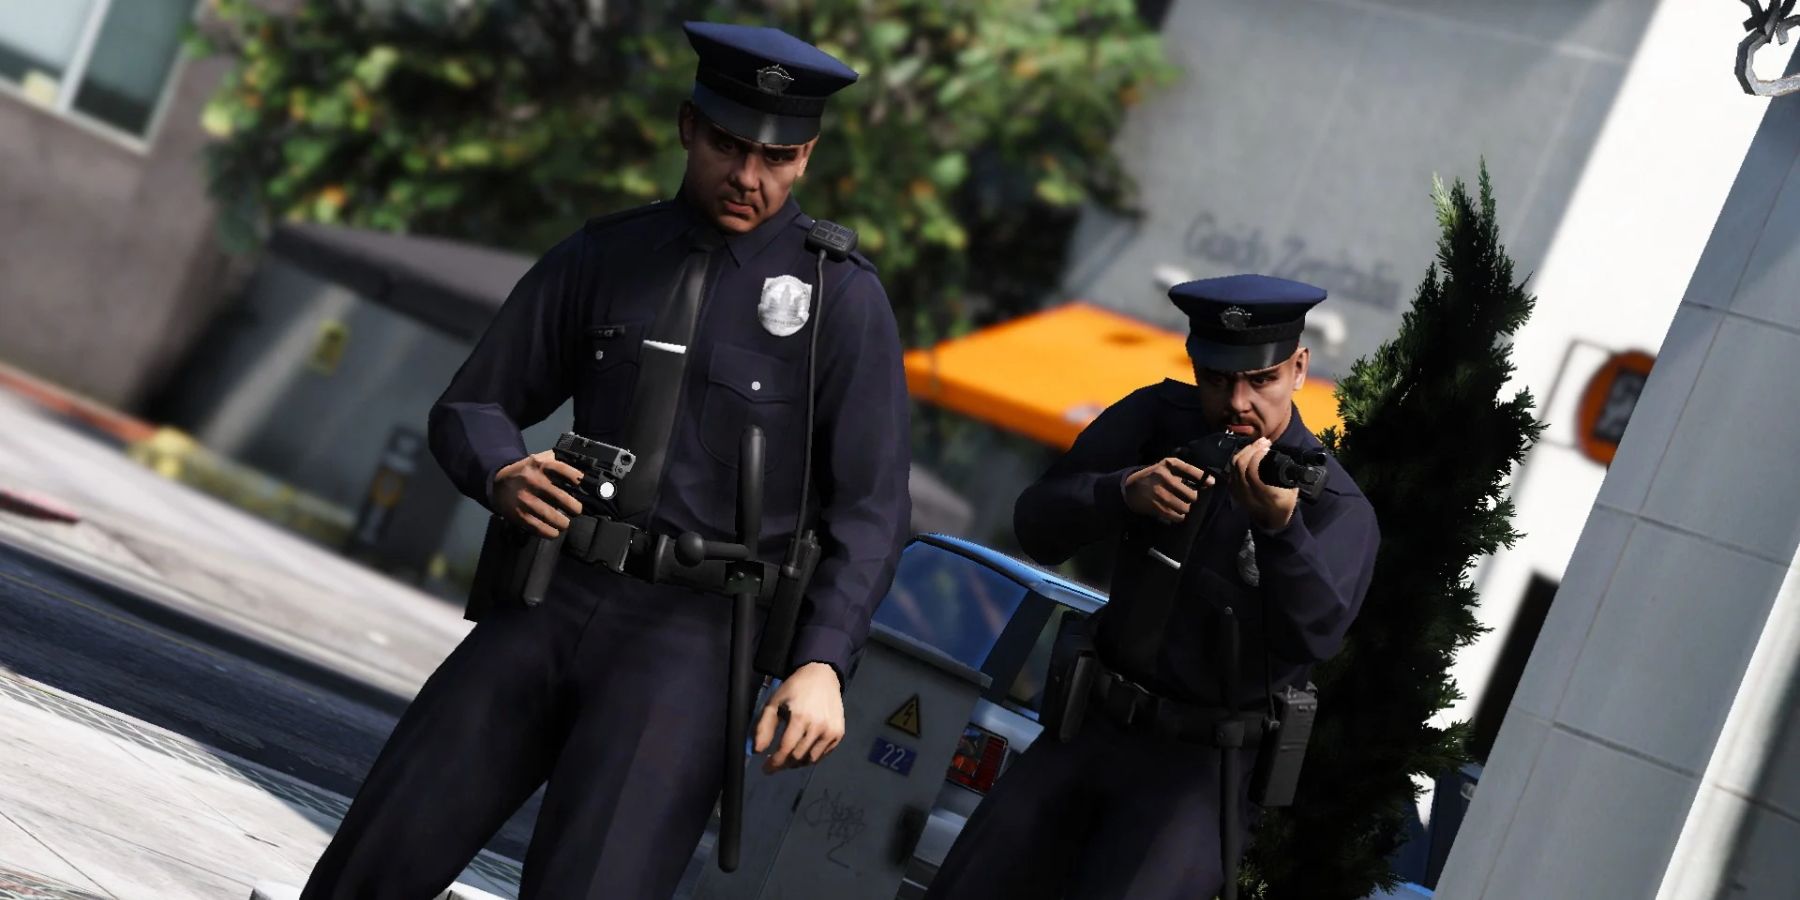 grand theft auto 5 police station